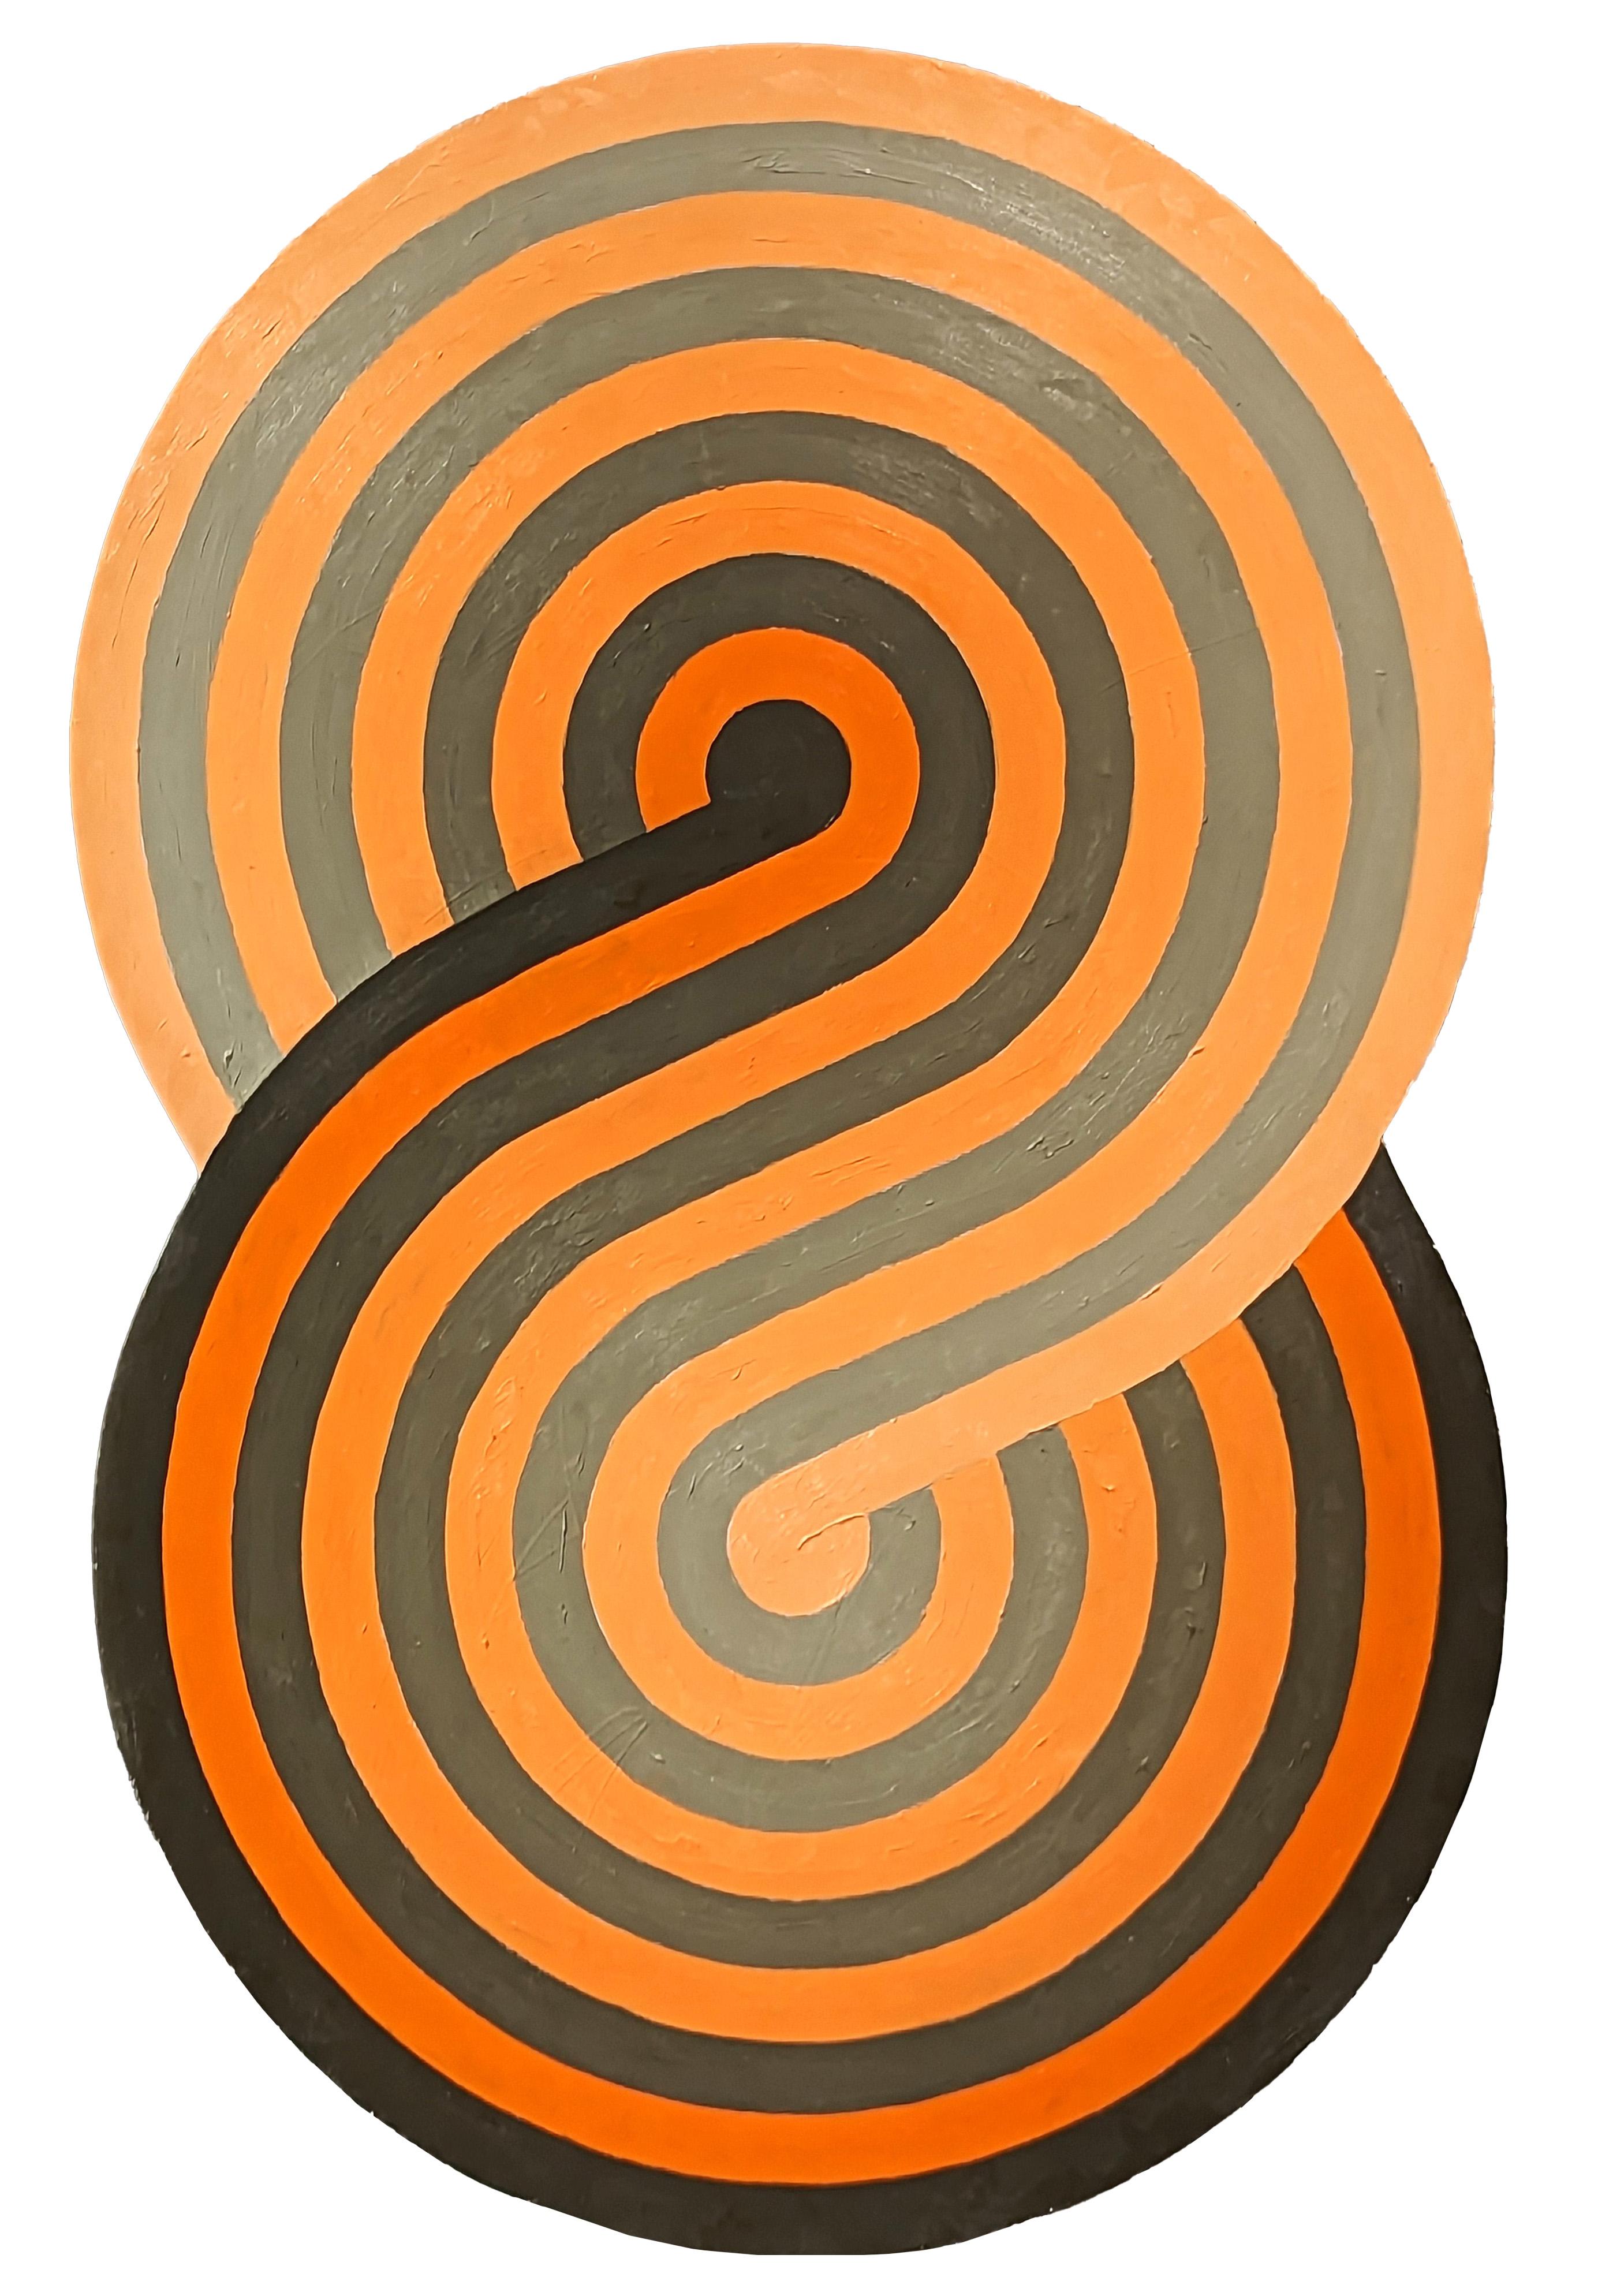 "Ohio" Contemporary Abstract Orange & Gray Concentric Circle Shaped Painting